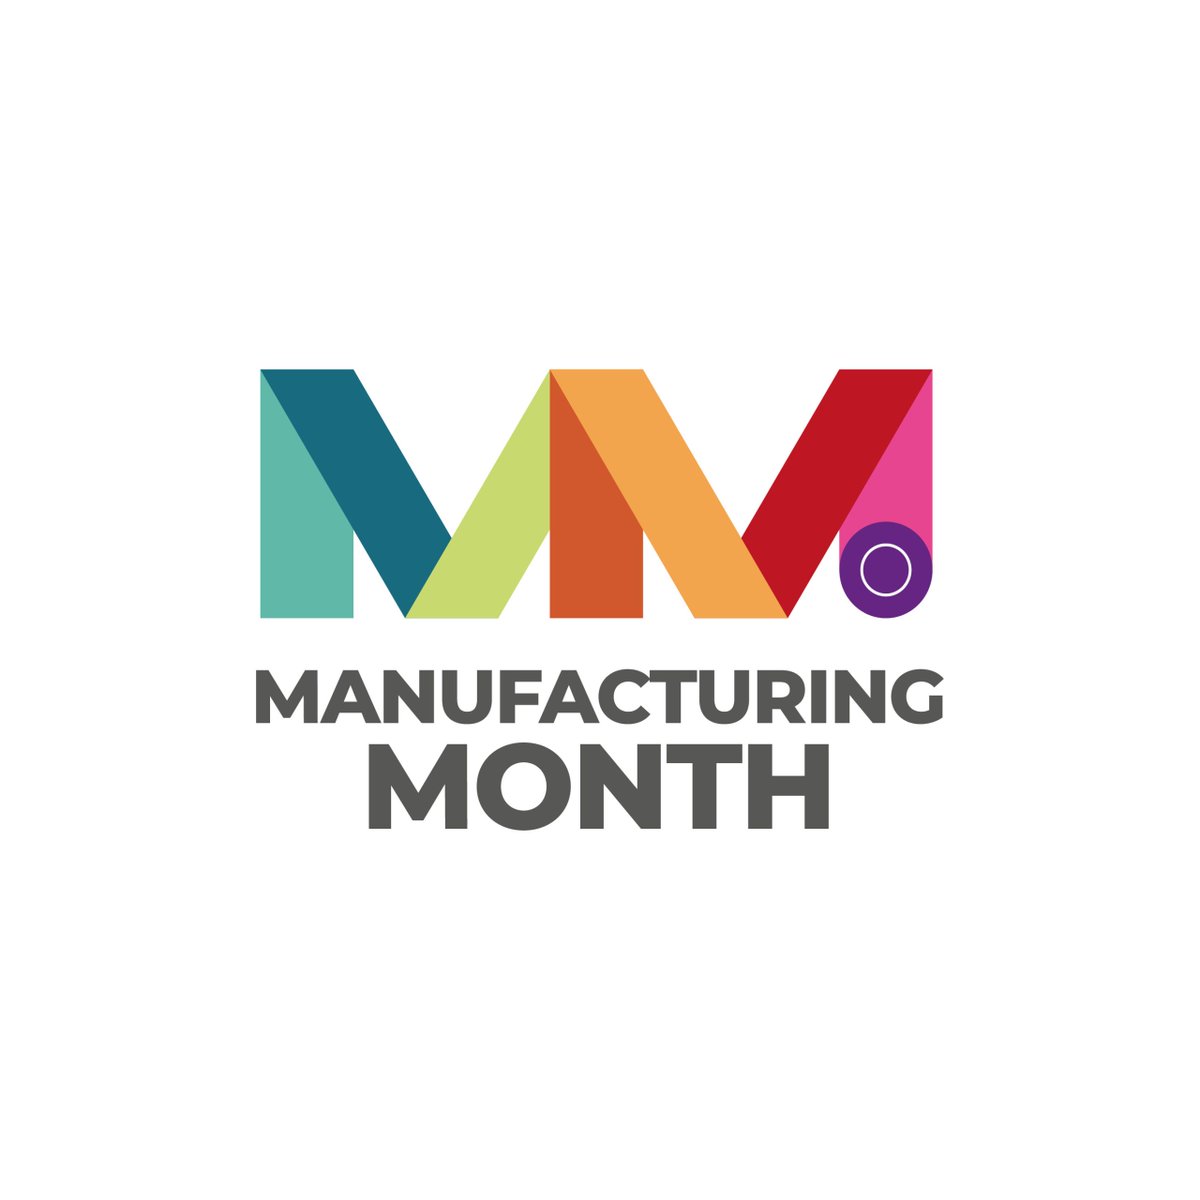 May is #Manufacturing Month Led by @ManufacturingNI , the month will be dedicated to shining a spotlight on the companies, workers, and visionaries who all contribute to making NI’s manufacturing sector the global success story that it is. Read more at manufacturingmonthni.com